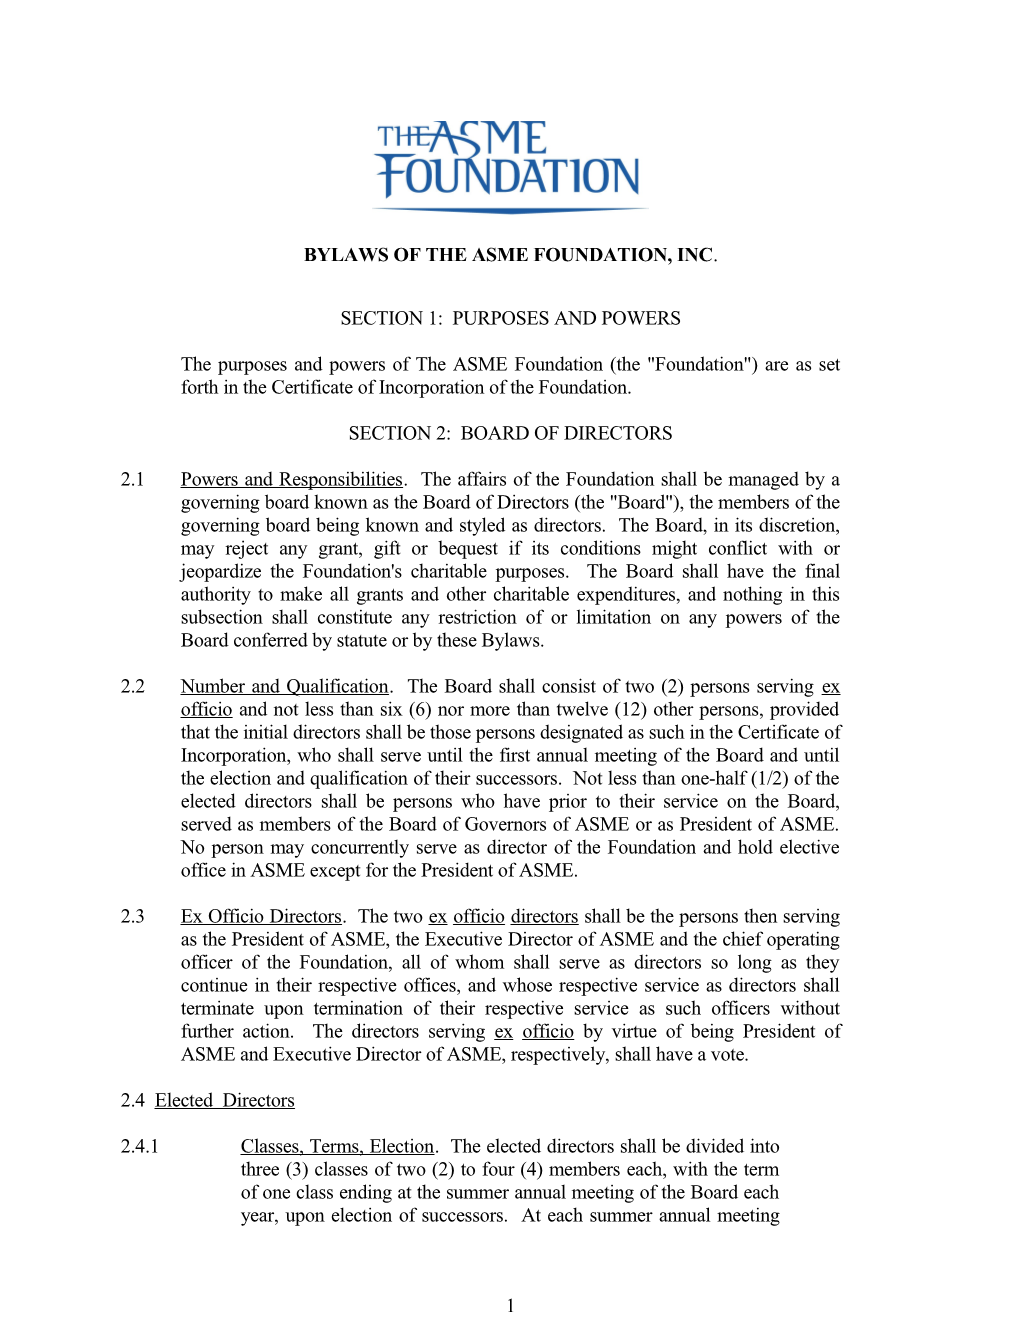 Bylaws of the Asme Foundation, Inc